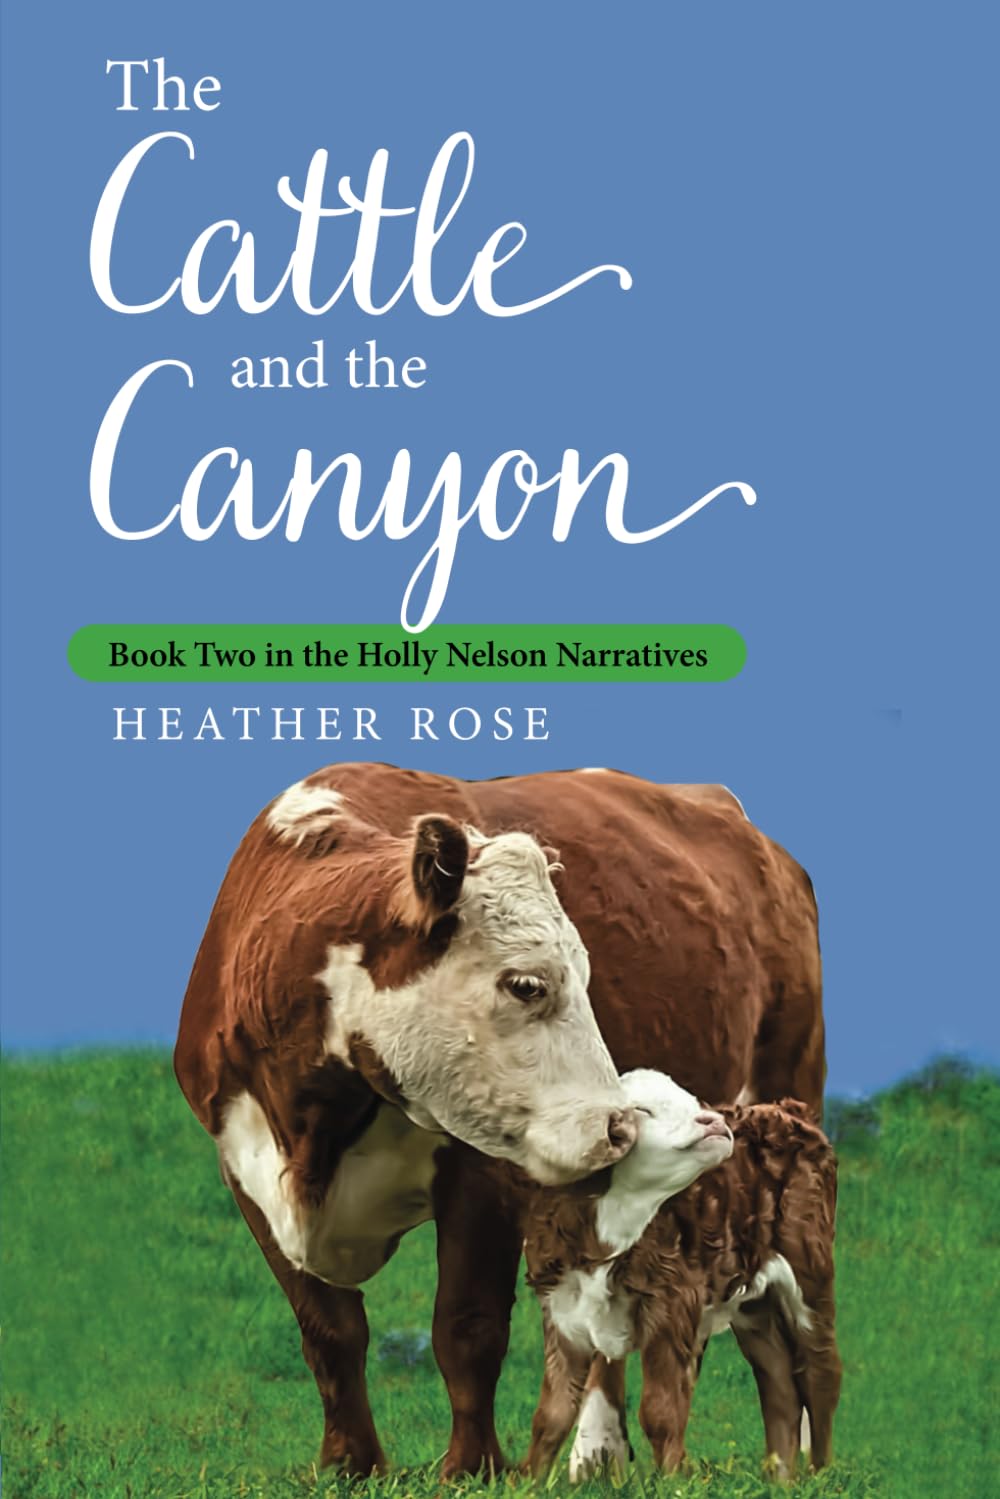 The poster of the cattle and the canyon with a cow in it.